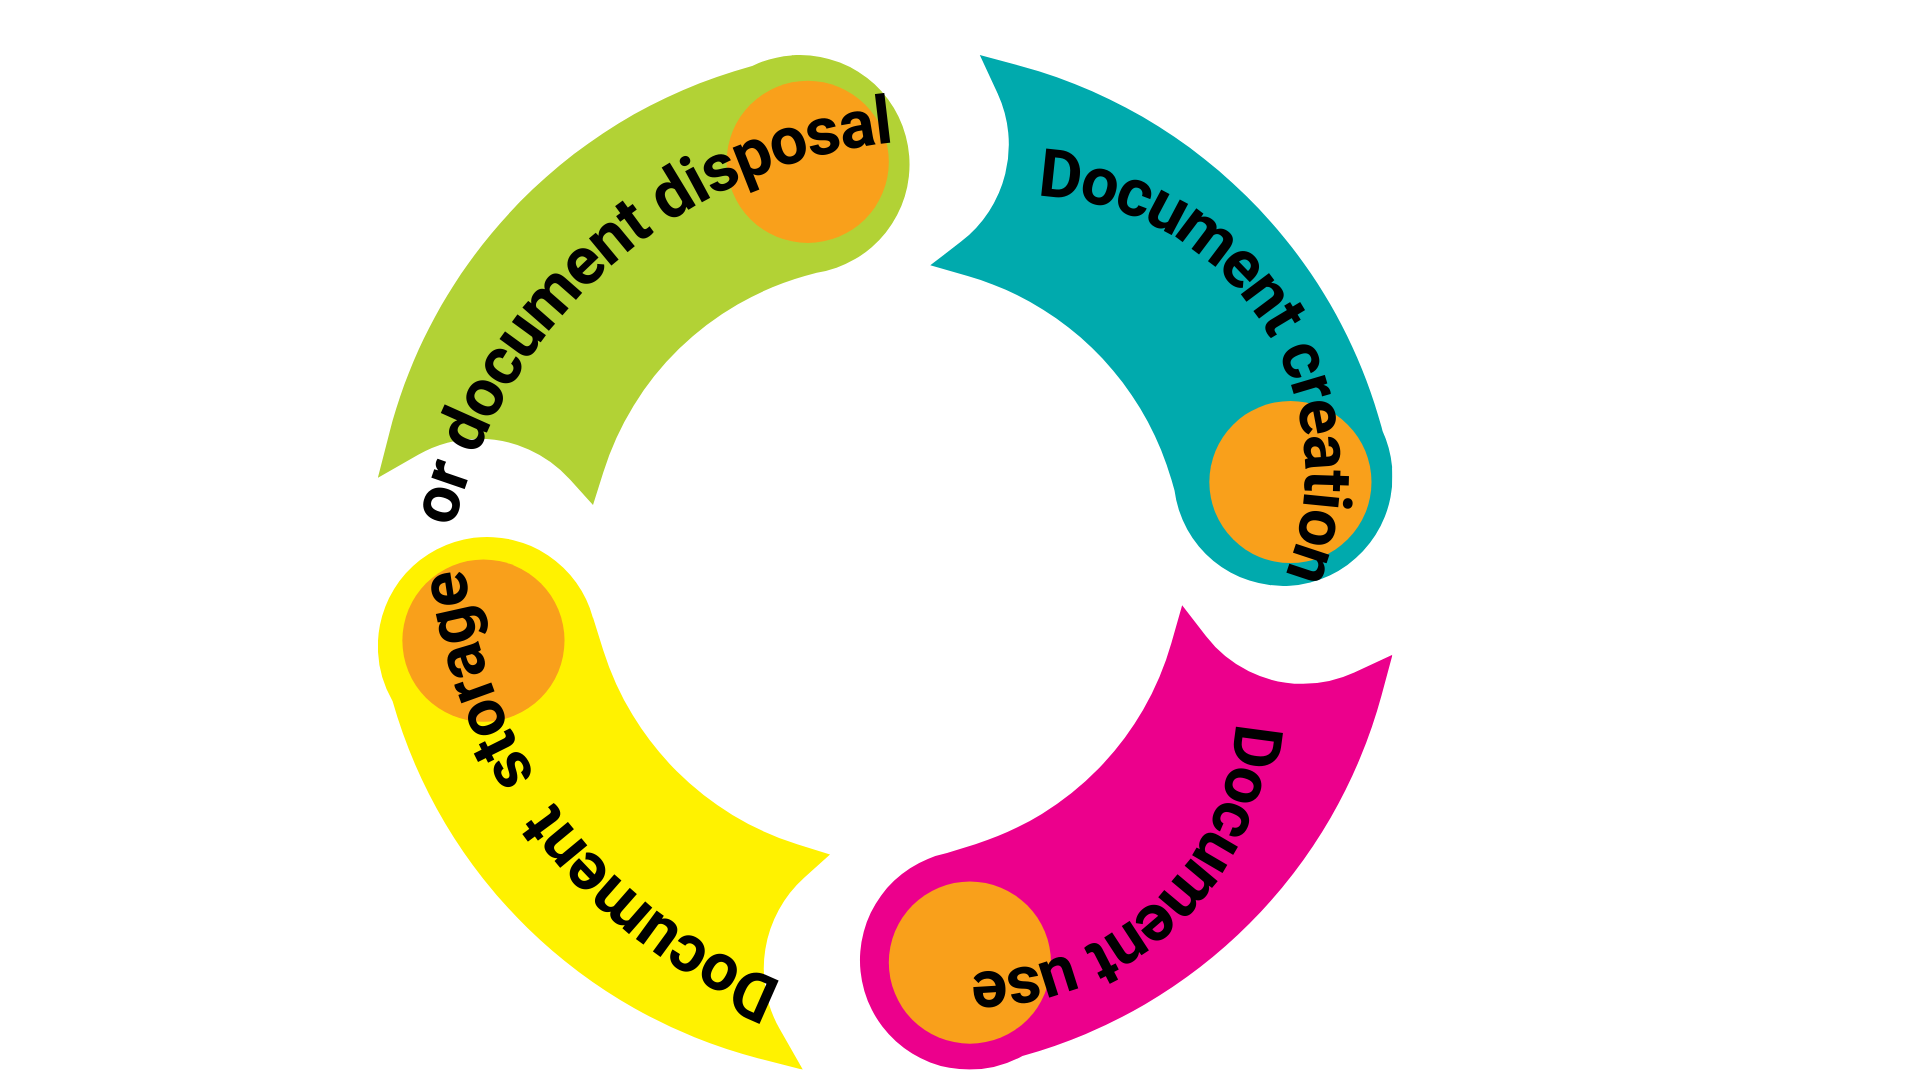 Paper document life cycle vs digital document lifecycle